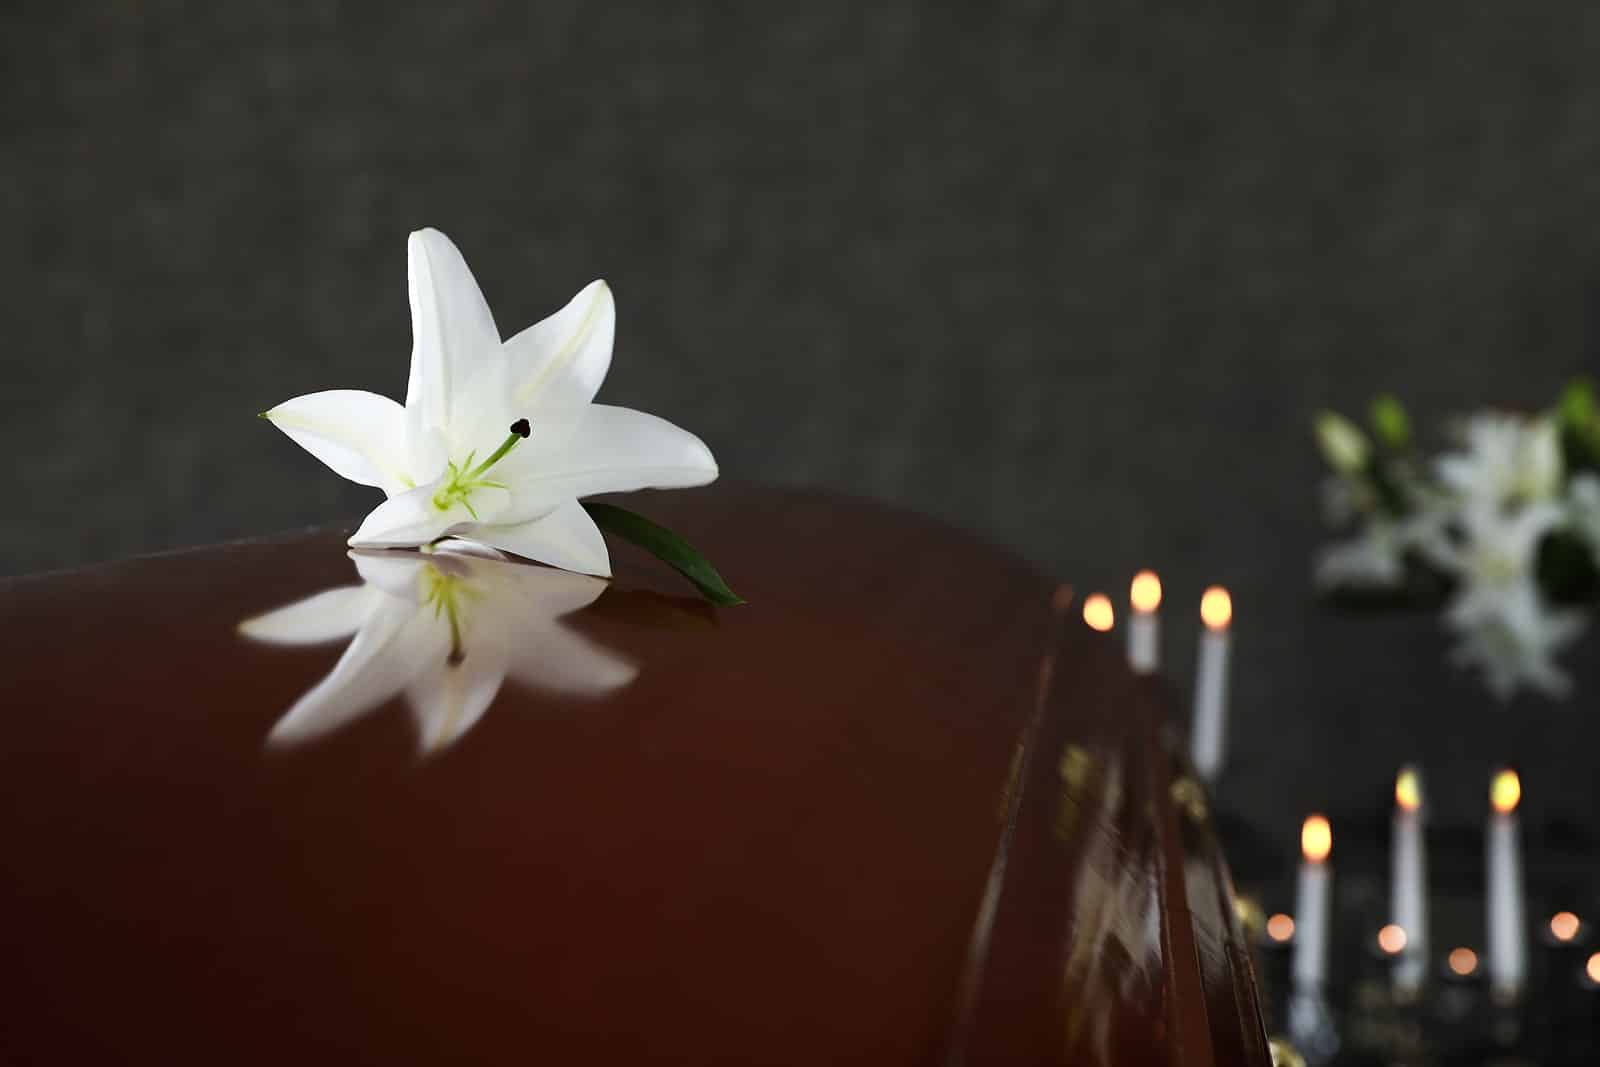 Image from inside inside a funeral home depicting a coffin with a white flower on it.